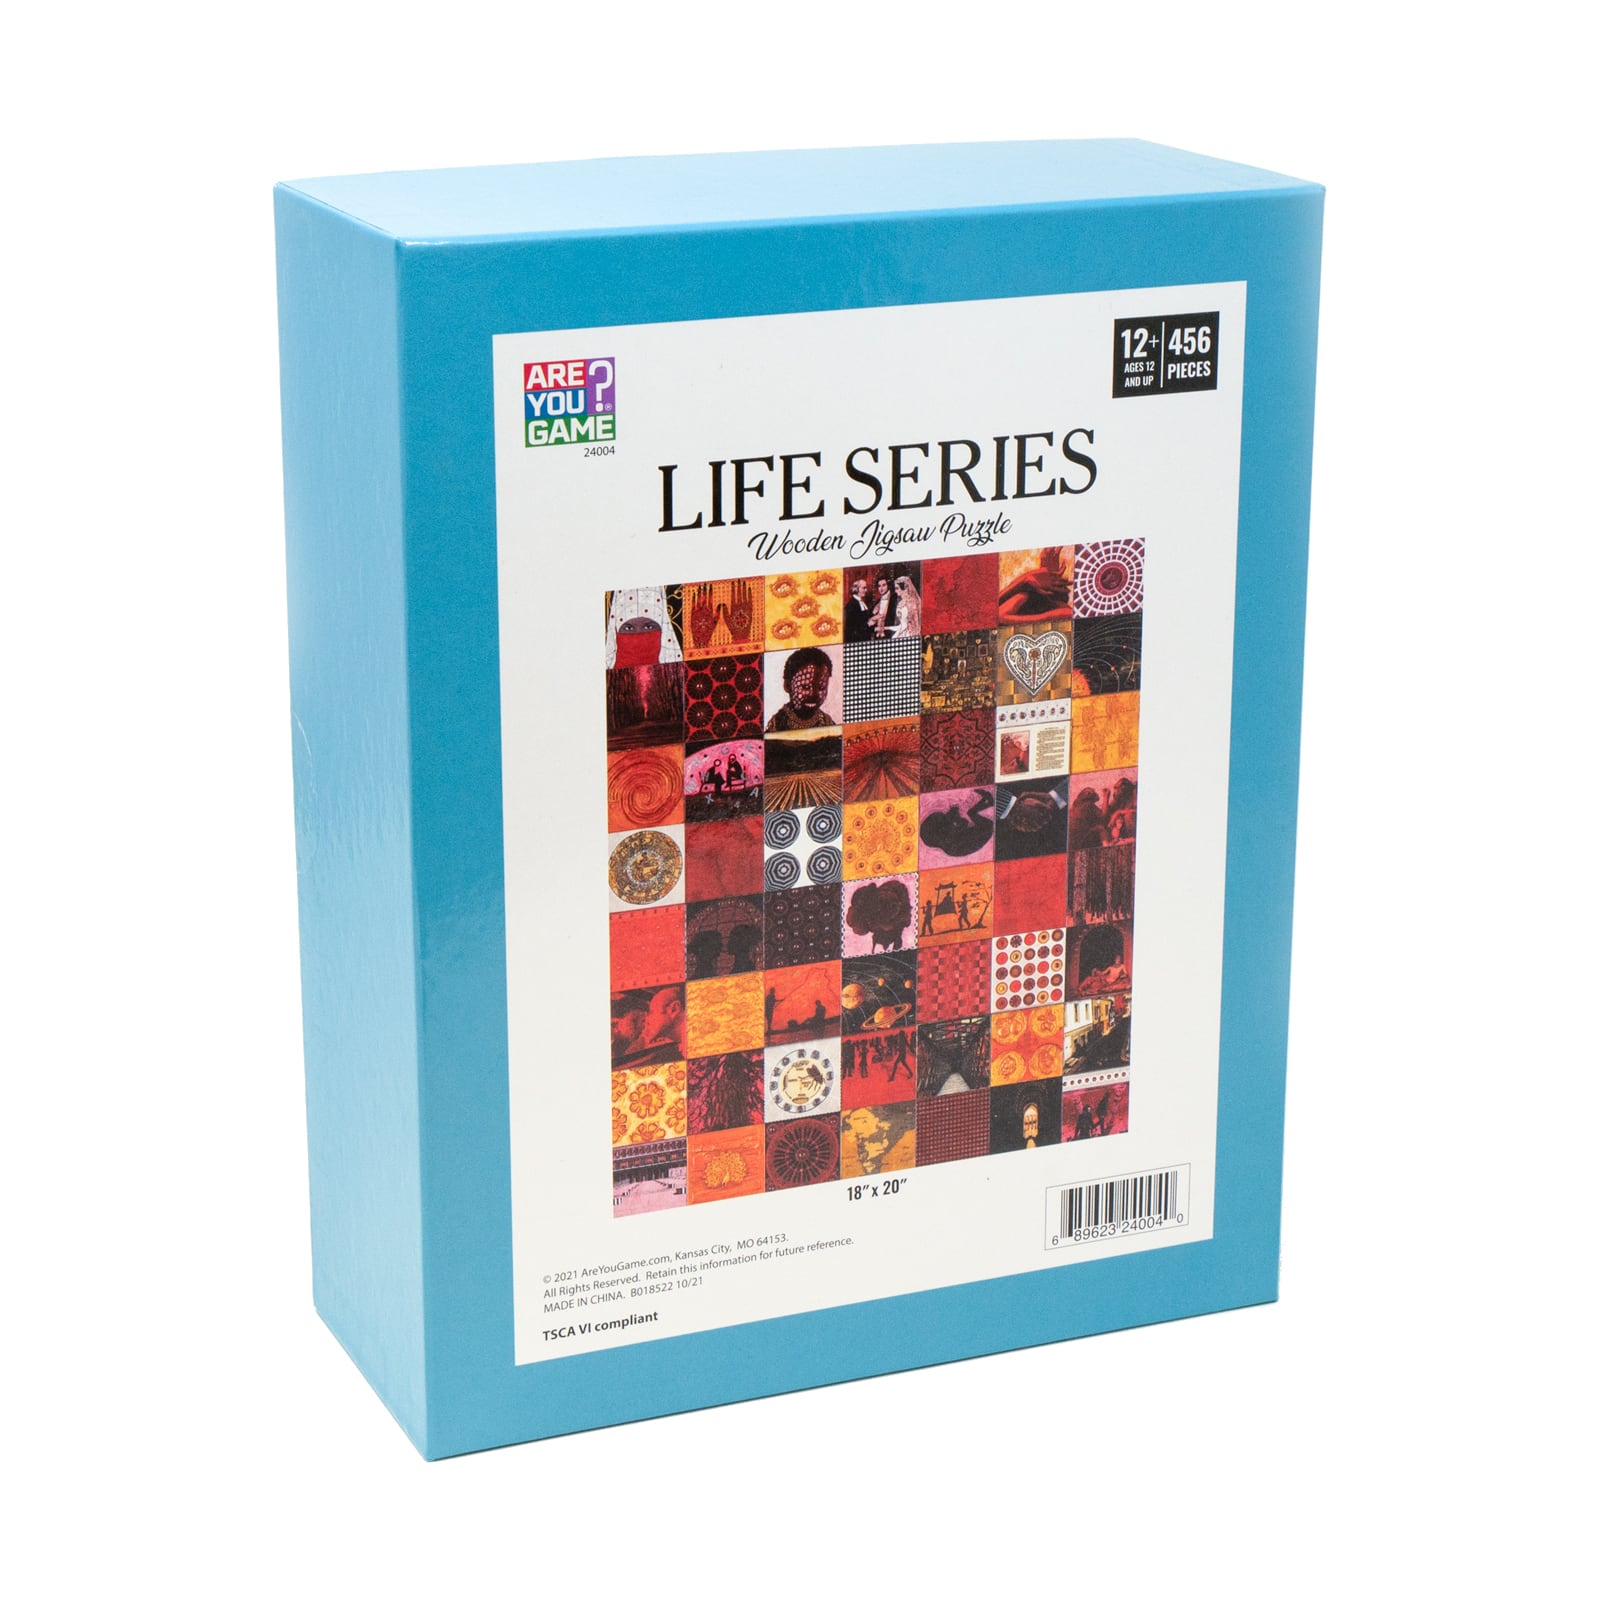 Wooden Jigsaw Puzzle - Life Series: 456 Pcs